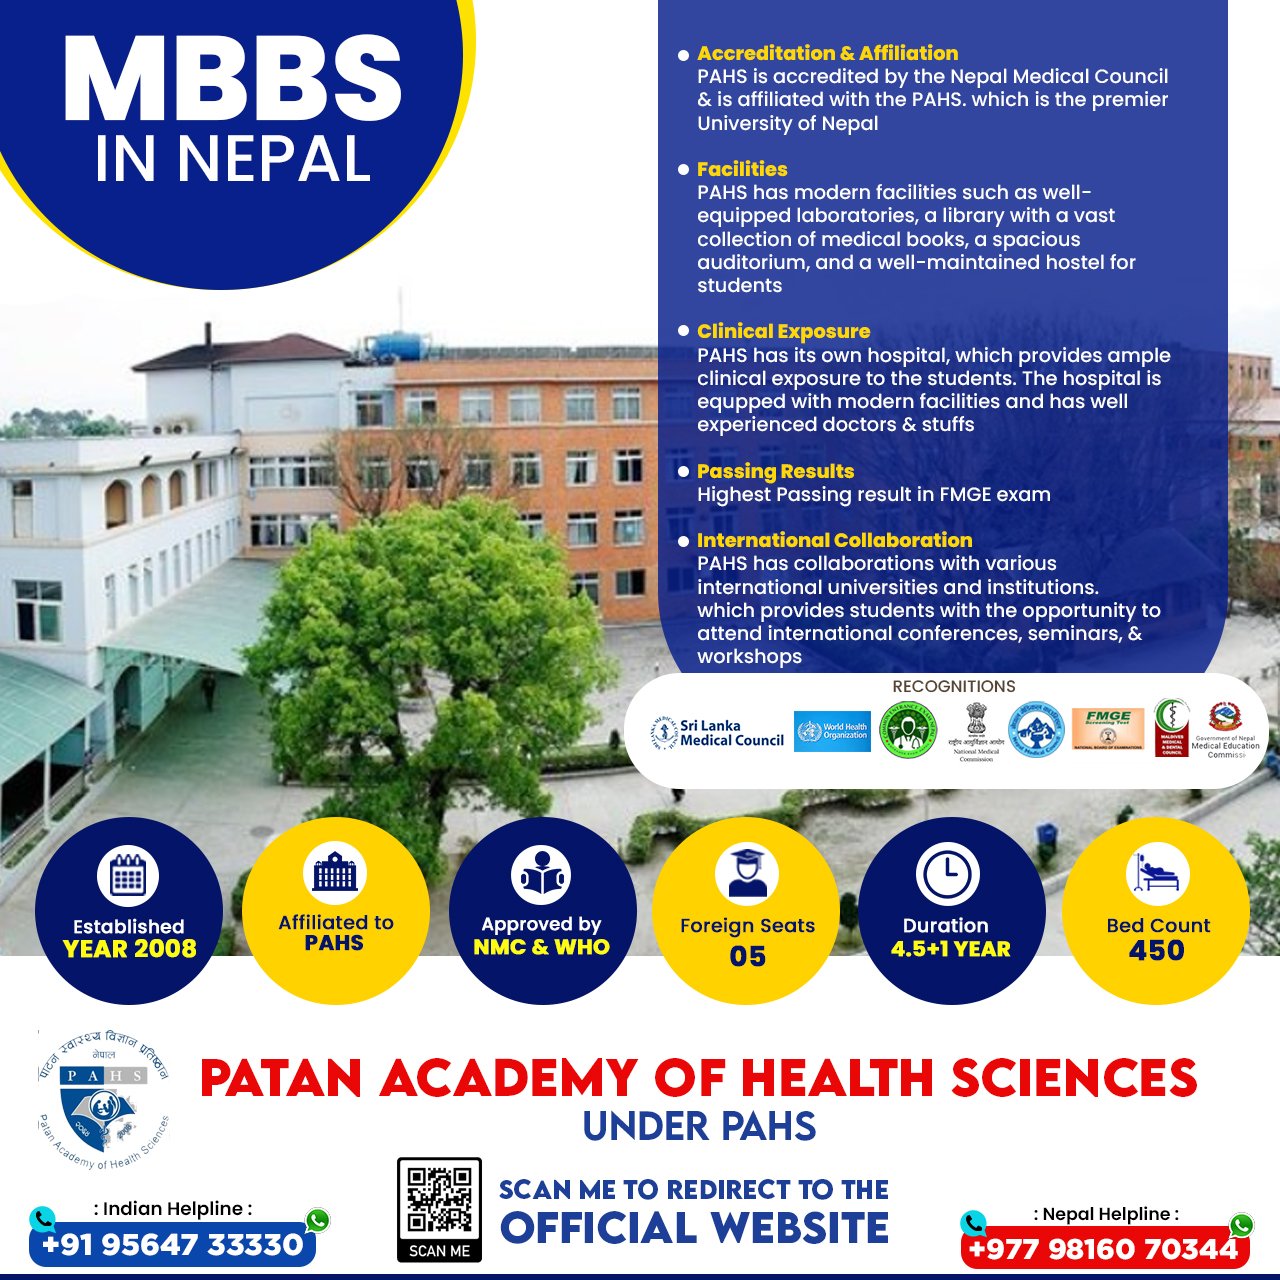 mbbs-in-nepal-at-patan-academy-of-health-sciences-under-pahs